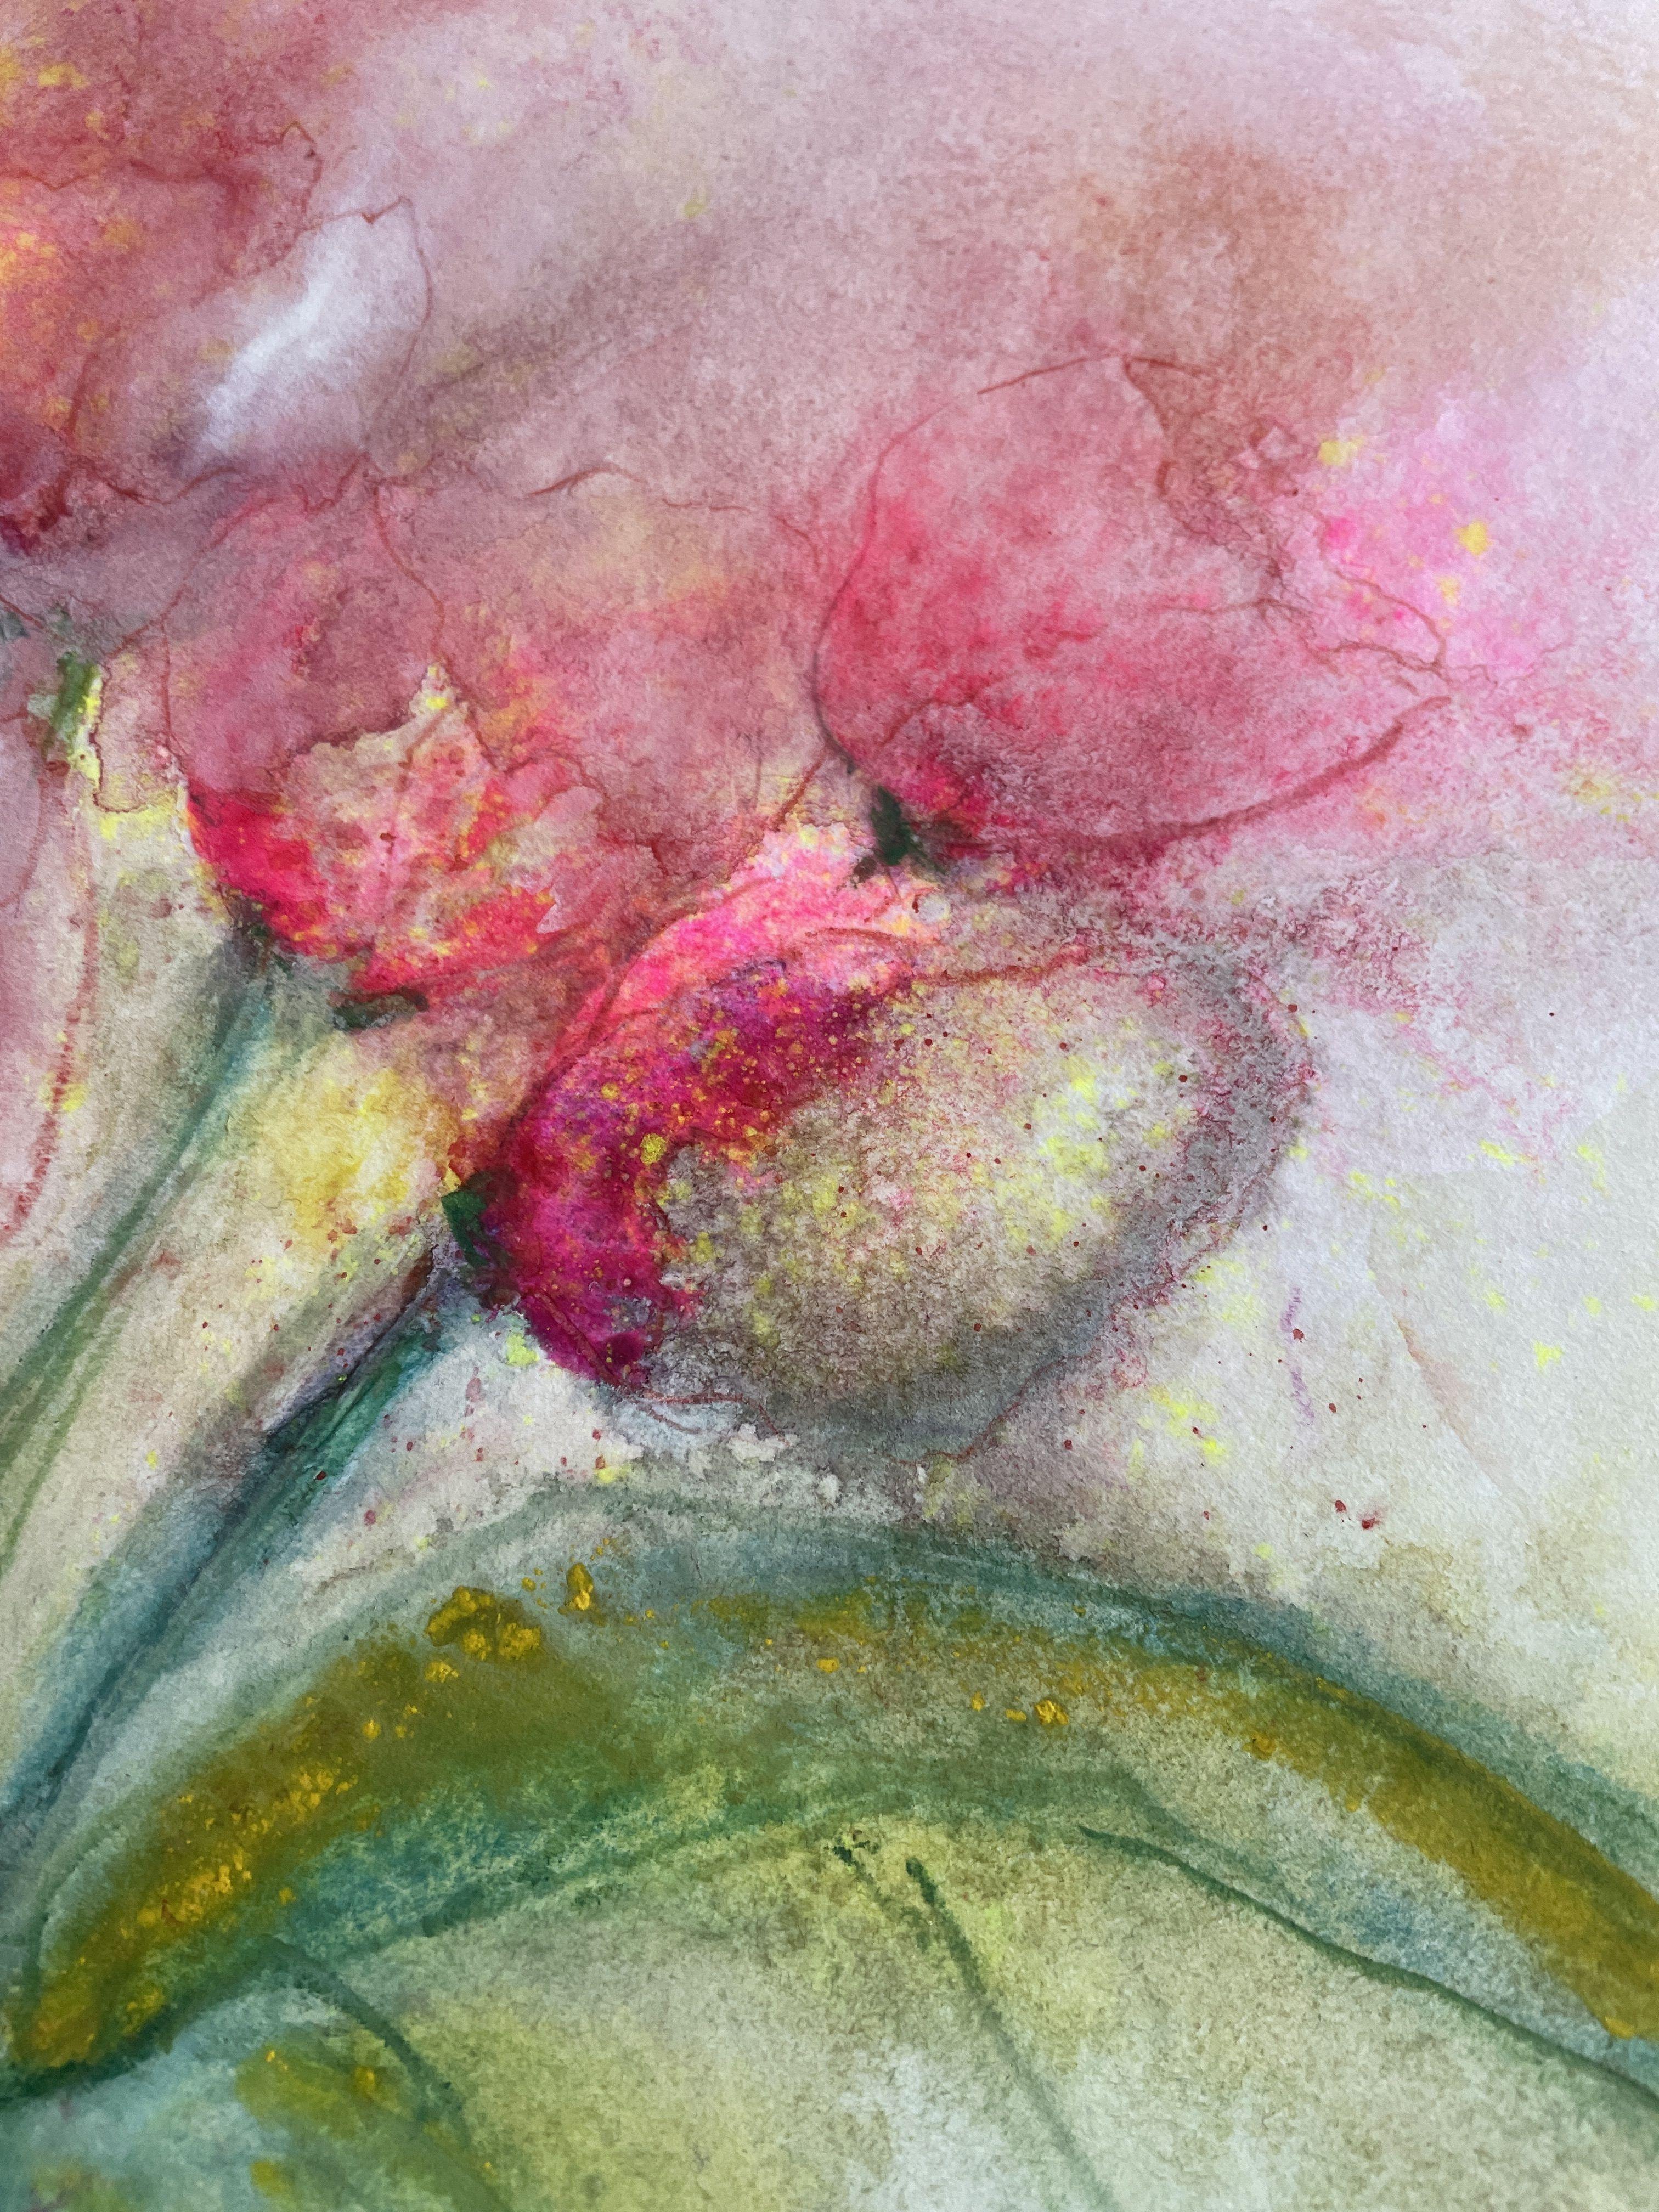 A Hint of Tulips, Painting, Watercolor on Paper - Expressionist Art by Gesa Reuter